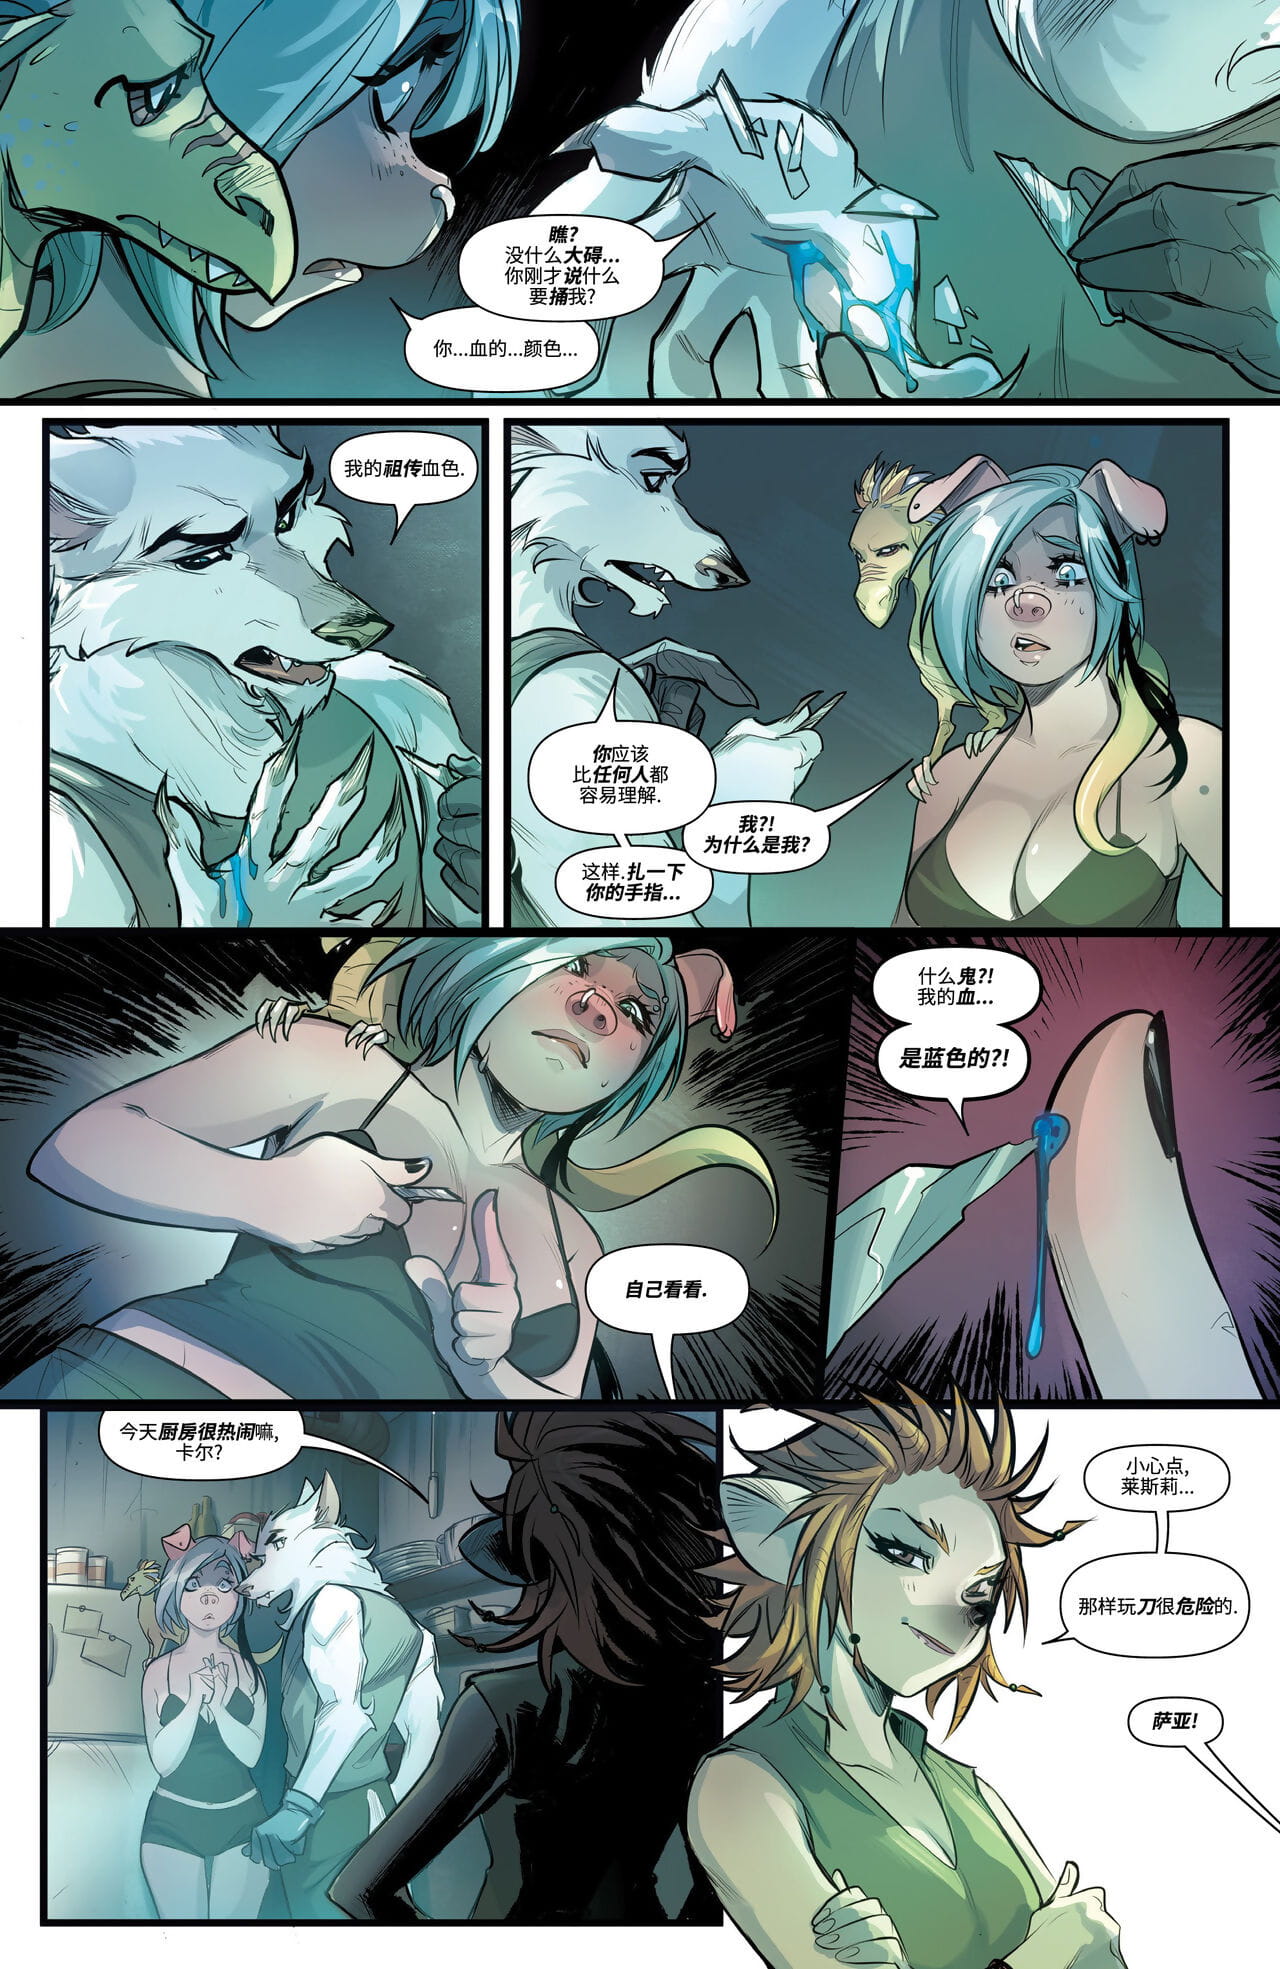 Unnatural - 反自然 - Issue 5 page 1